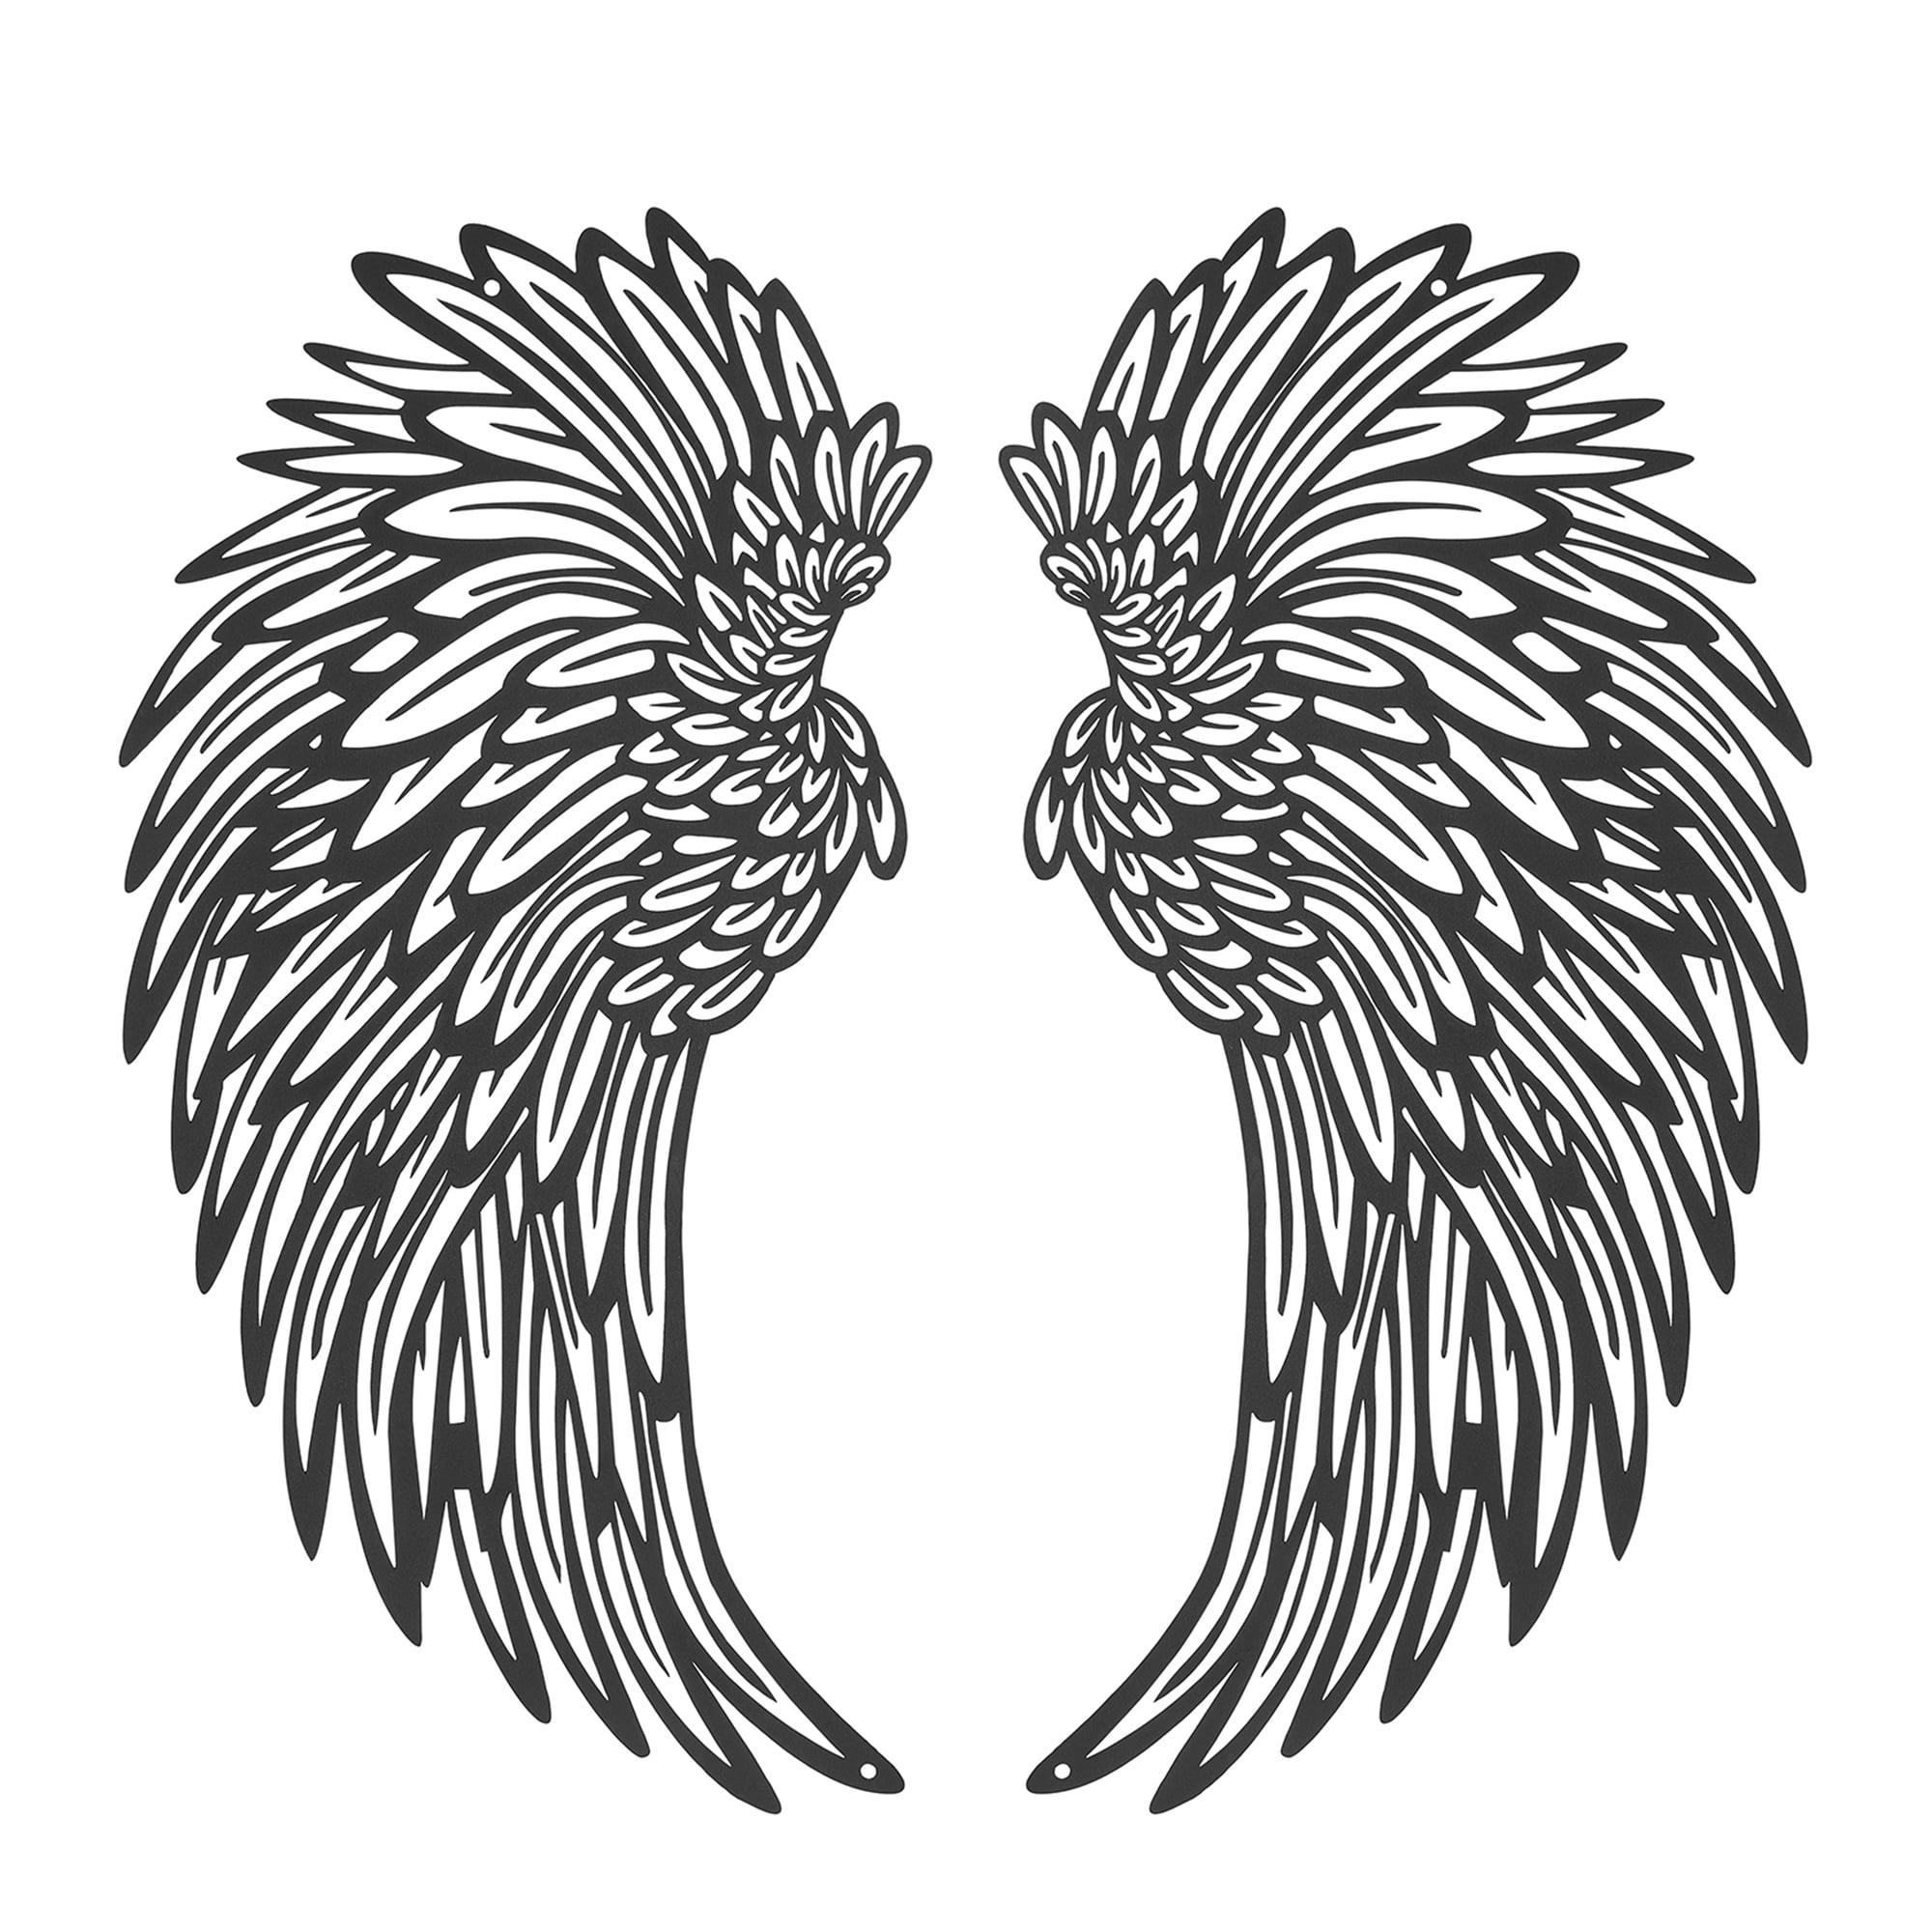 Eyicmarn Angel Wings Metal Wall Art, Wings Wall Sculpture with LED ...